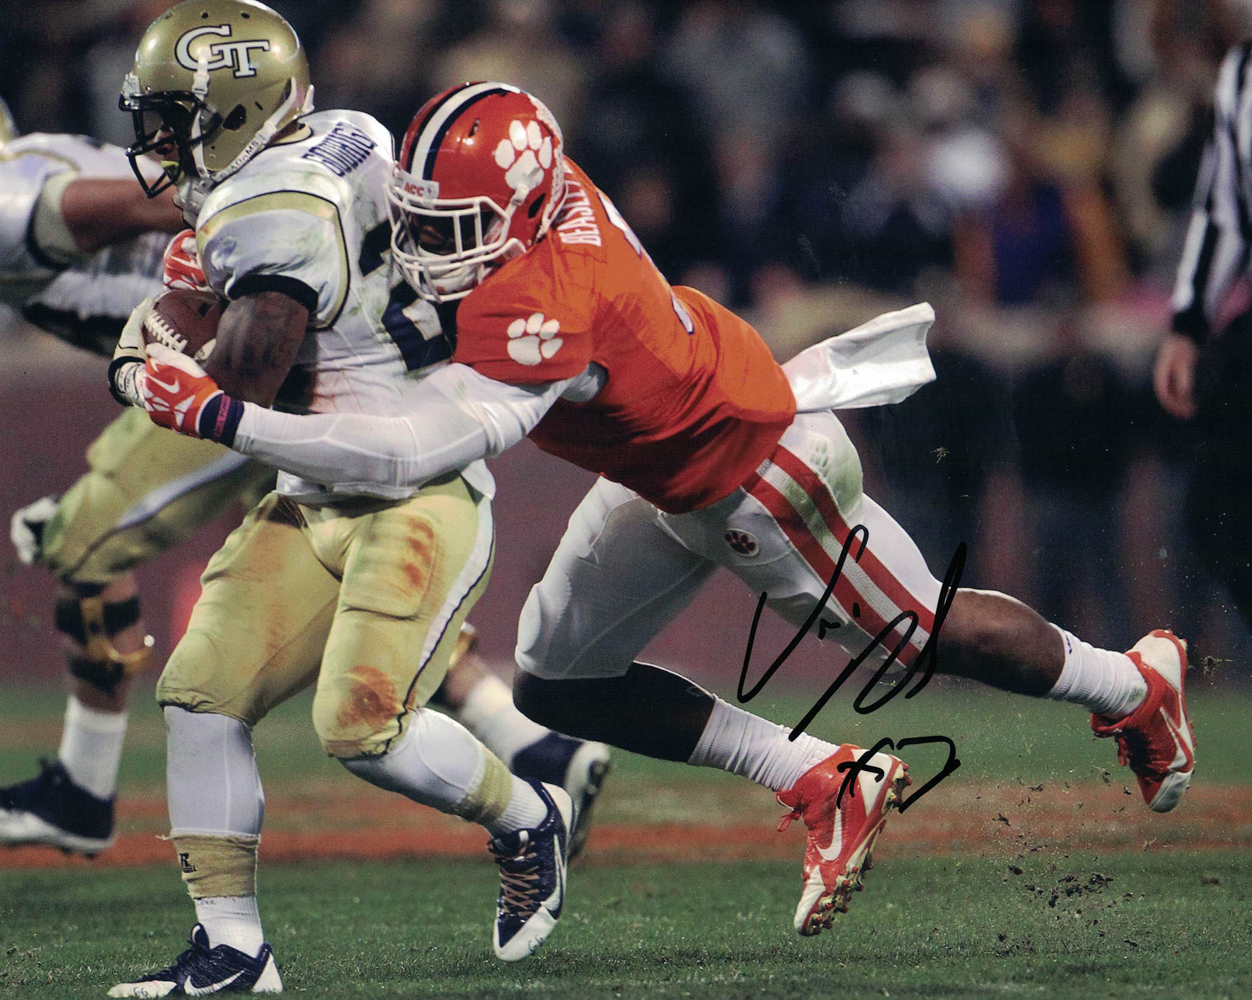 Vic Beasley Autographed/Signed Clemson Tigers 8x10 Photo 30309